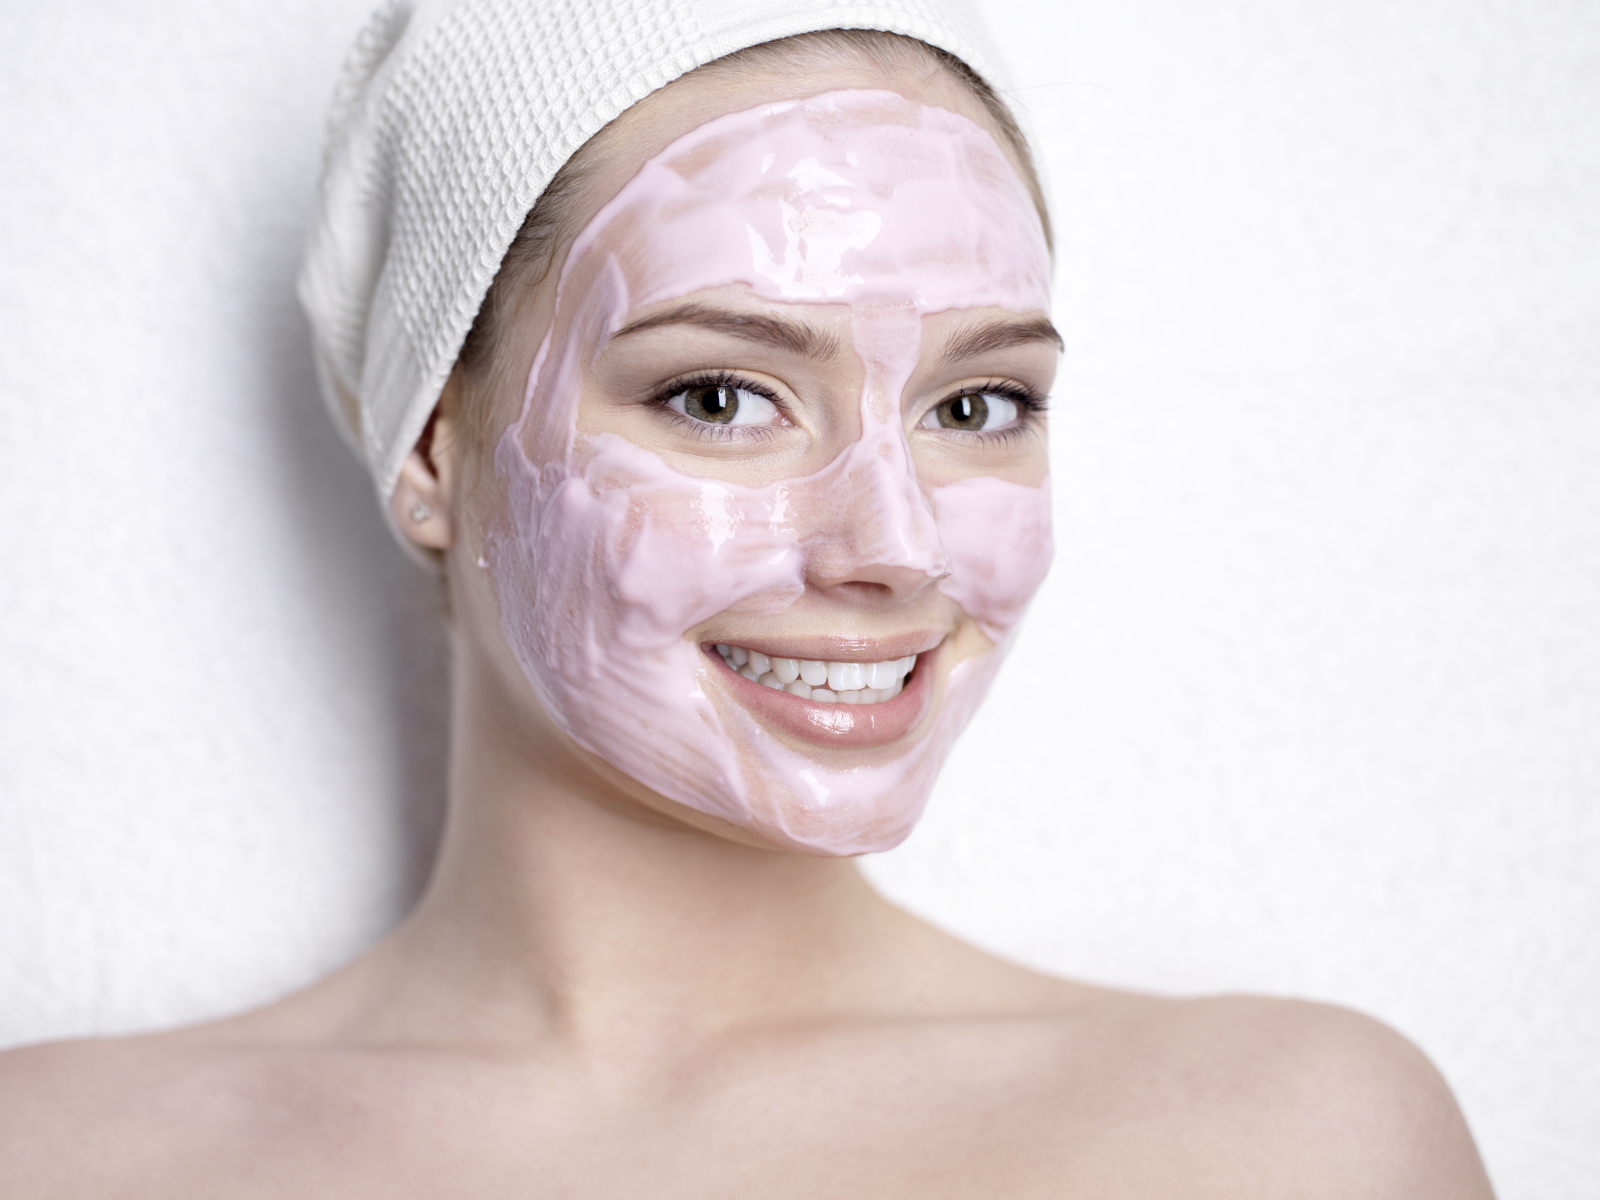 Jelly Face Masks Continue To Be One Of The Hottest Skin Care Treatments. 